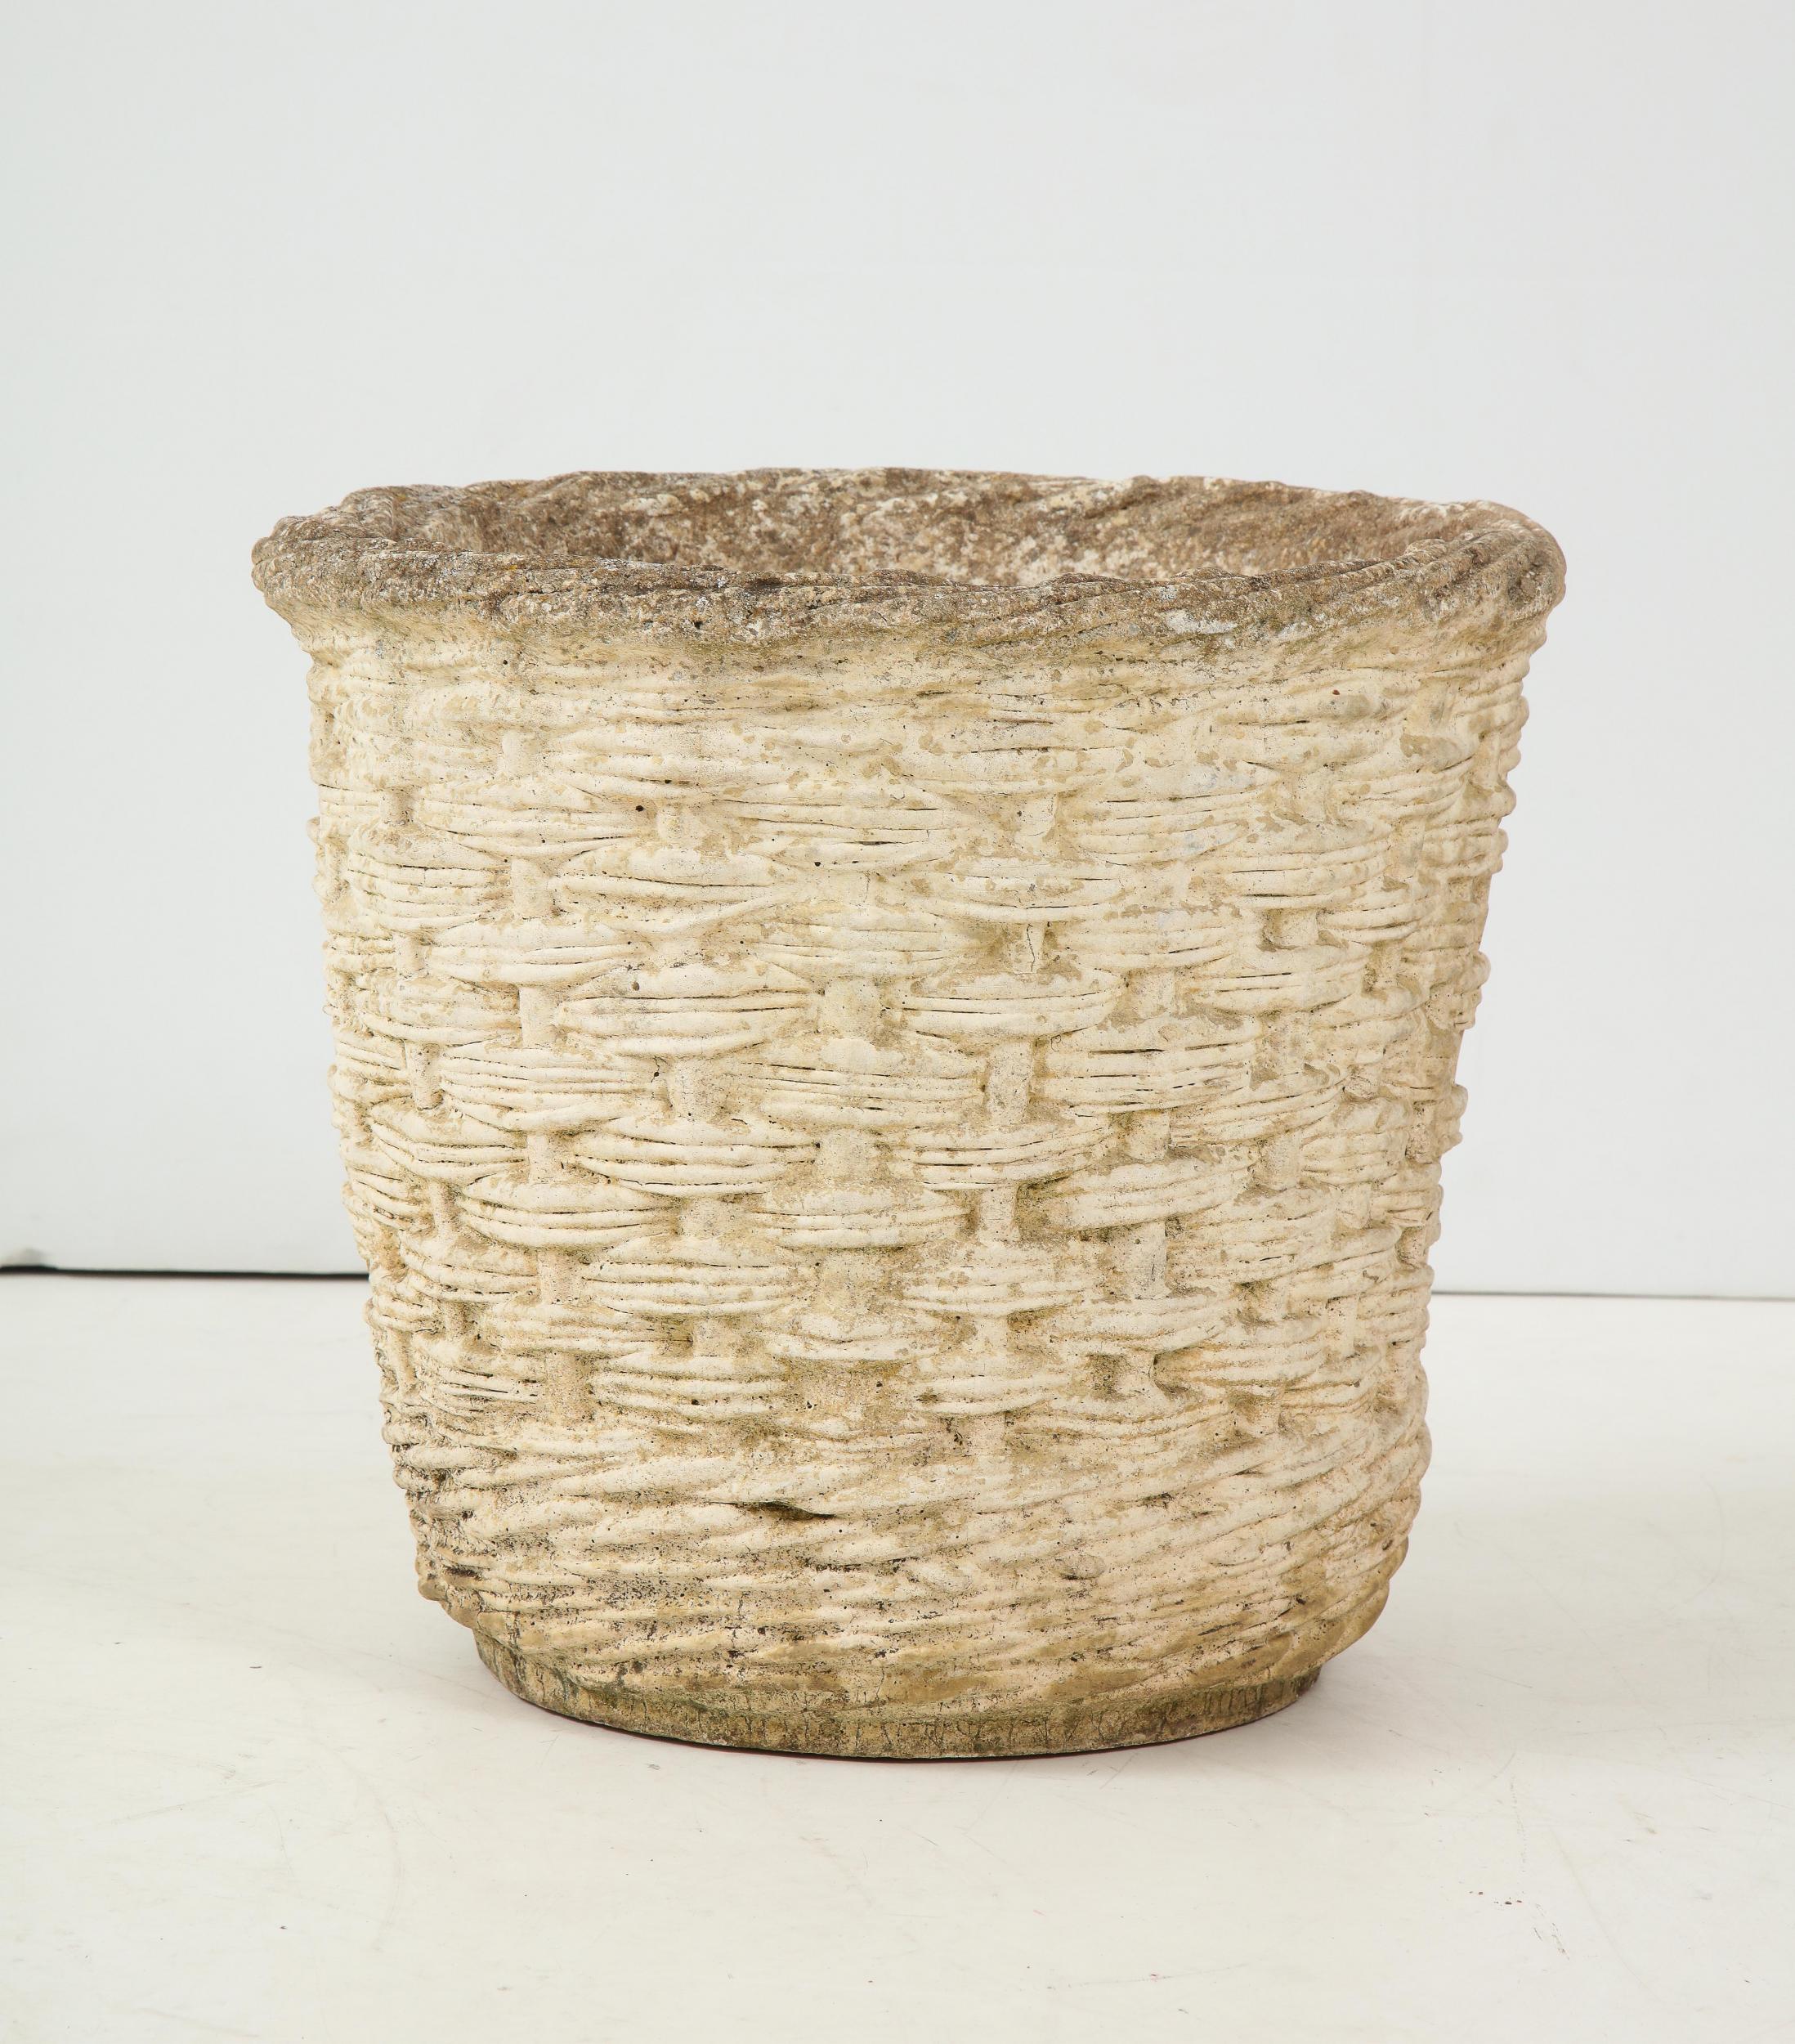 Cast stone garden planter in the style of a woven rattan basket, 20th century, French. Natural patina and wear consistent with age.